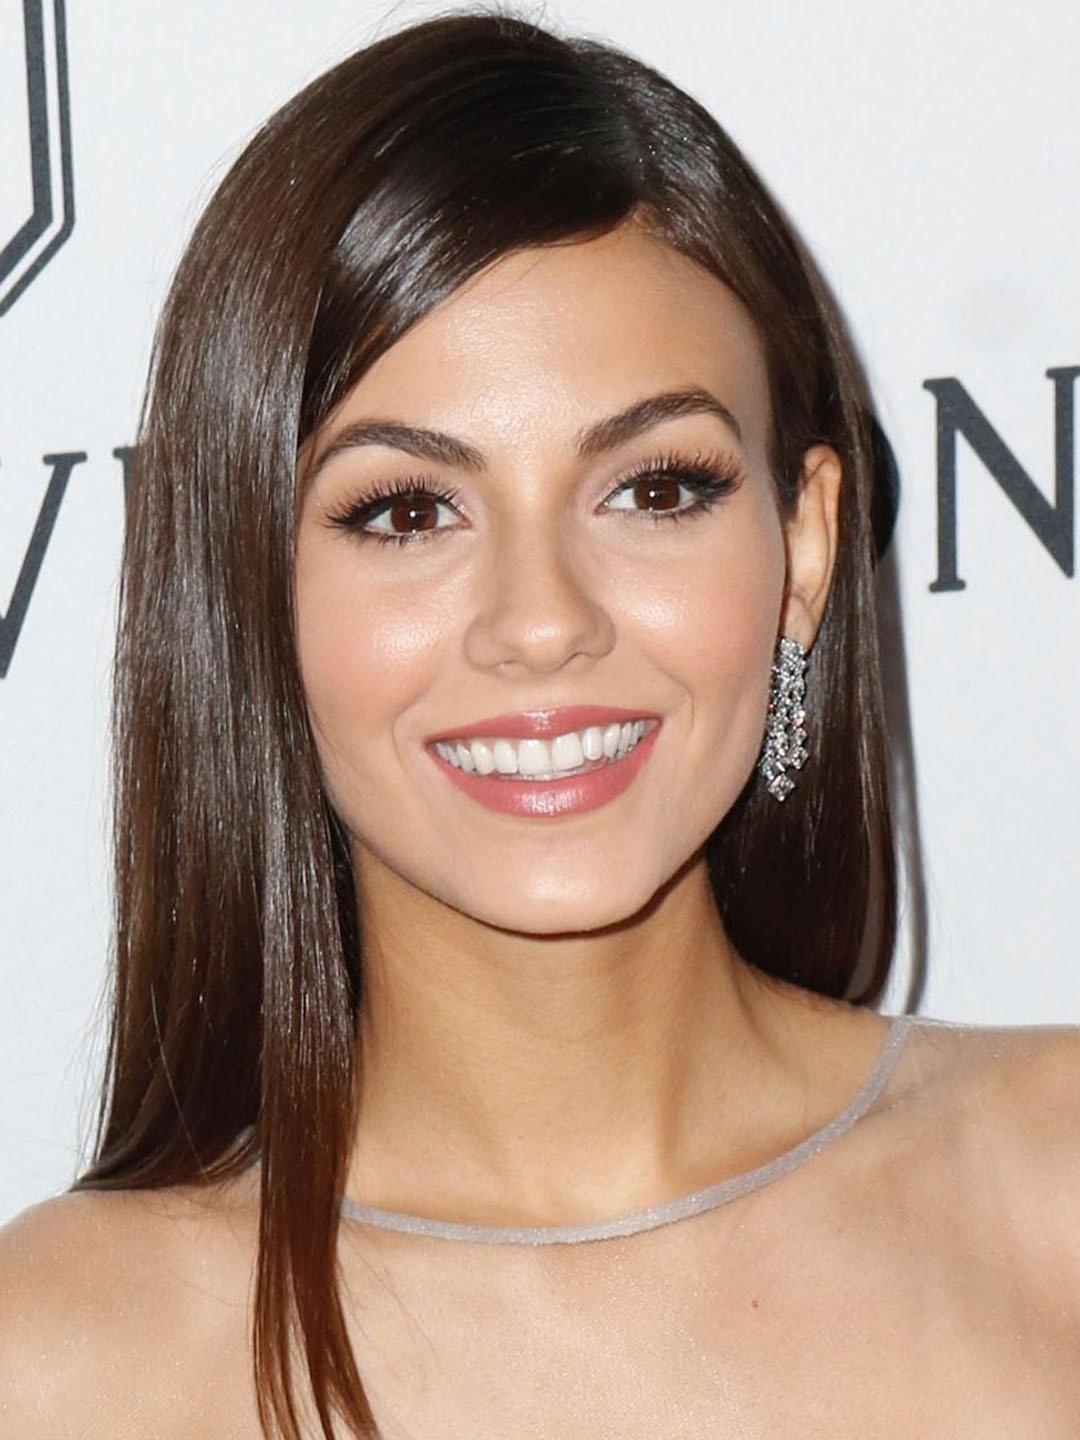 Best Victoria Justice movies and shows (and where to stream them)